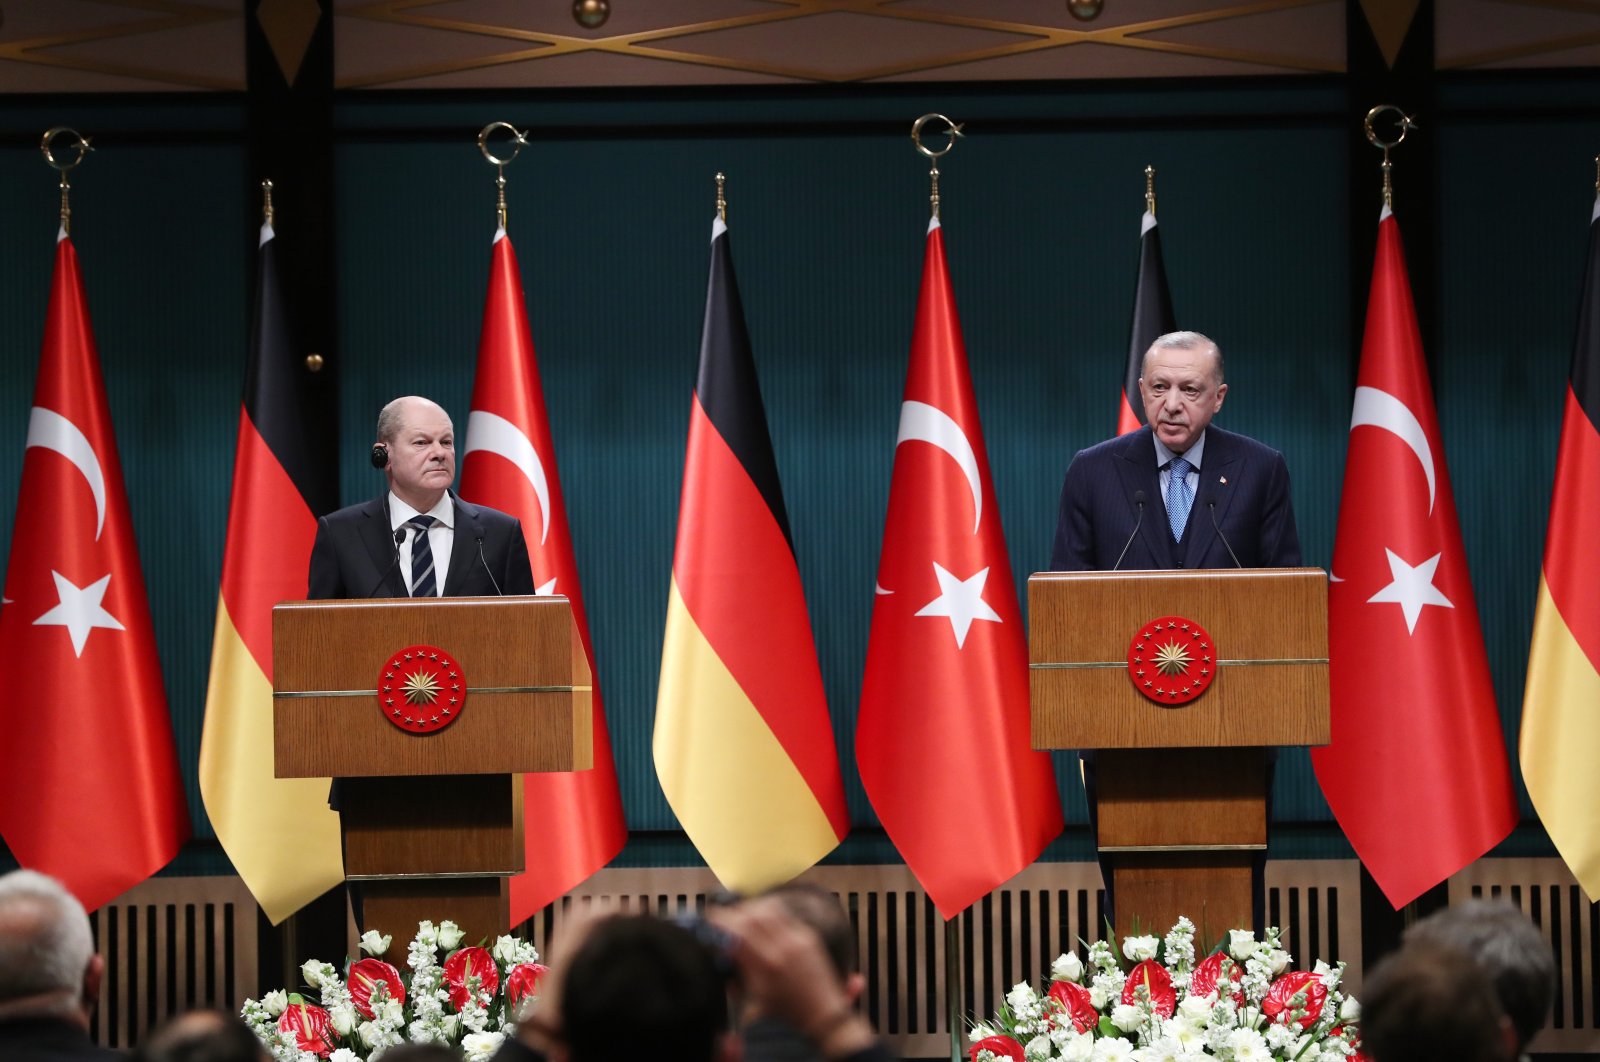 President Recep Tayyip Erdoğan and German Chancellor Olaf Scholz hold a joint press conference in the capital Ankara, Türkiye, March 16, 2022. (AA Photo)